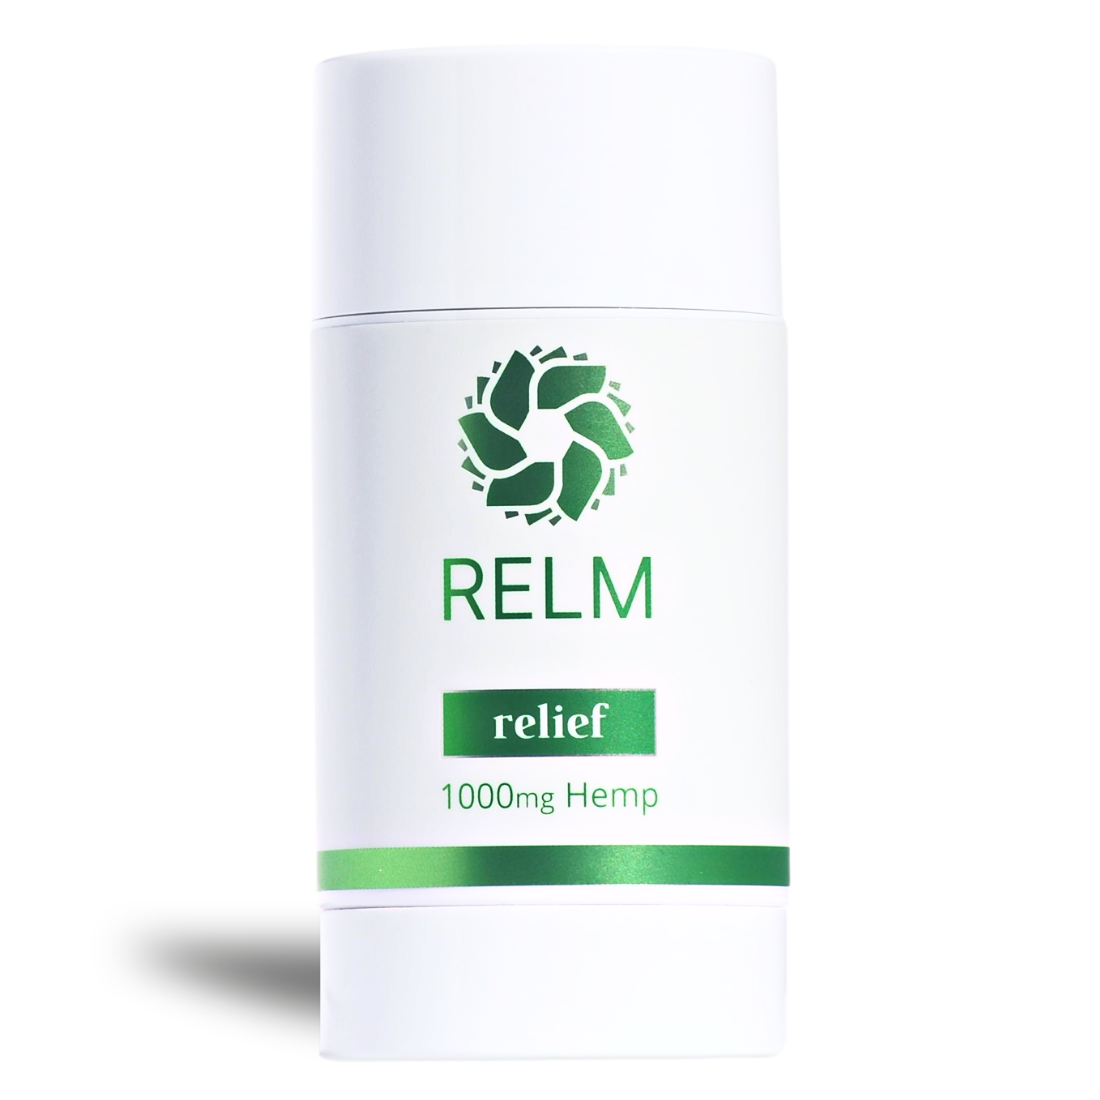 Arthritis relief body cream | Recovery Stick | Muscle Pain Relief Stick | Hemp Hand Cream for Arthritis | Pain Relief Stick | Relm Healing Relief Stick for Pain and Arthritis | Best cream topical for pain relief | Use on knees, lower back, elbow, wrist, hands, arthritis, nerve pain, neuropathy | Menthol pain relief lotion